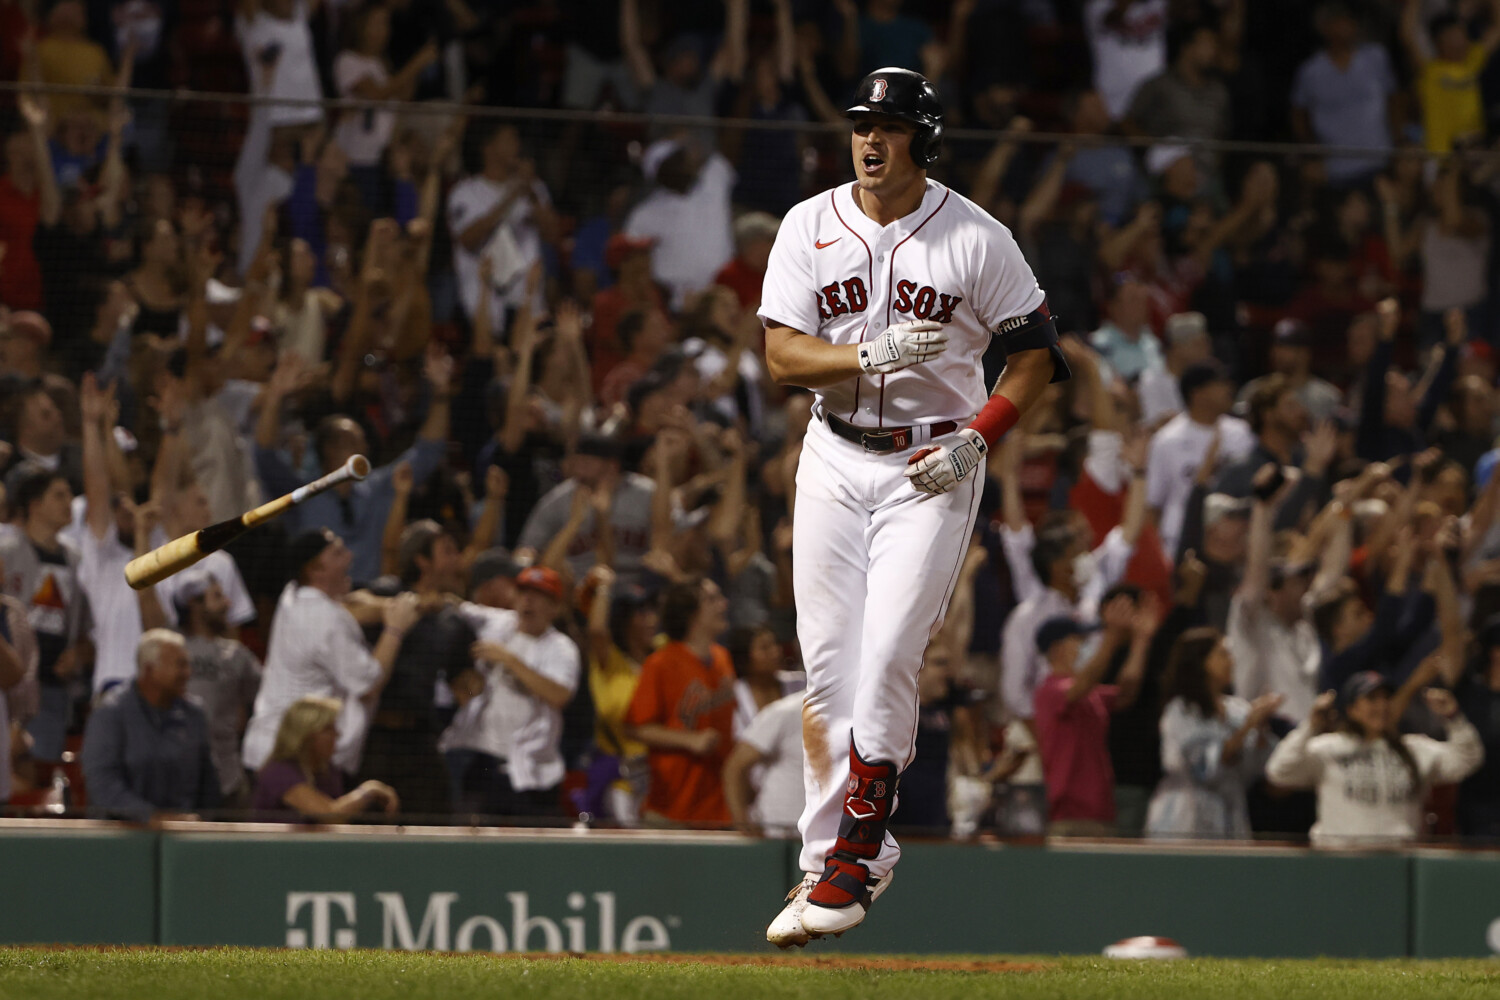 Red Sox beat Rays 2-1 on Renfroe's homer in 8th